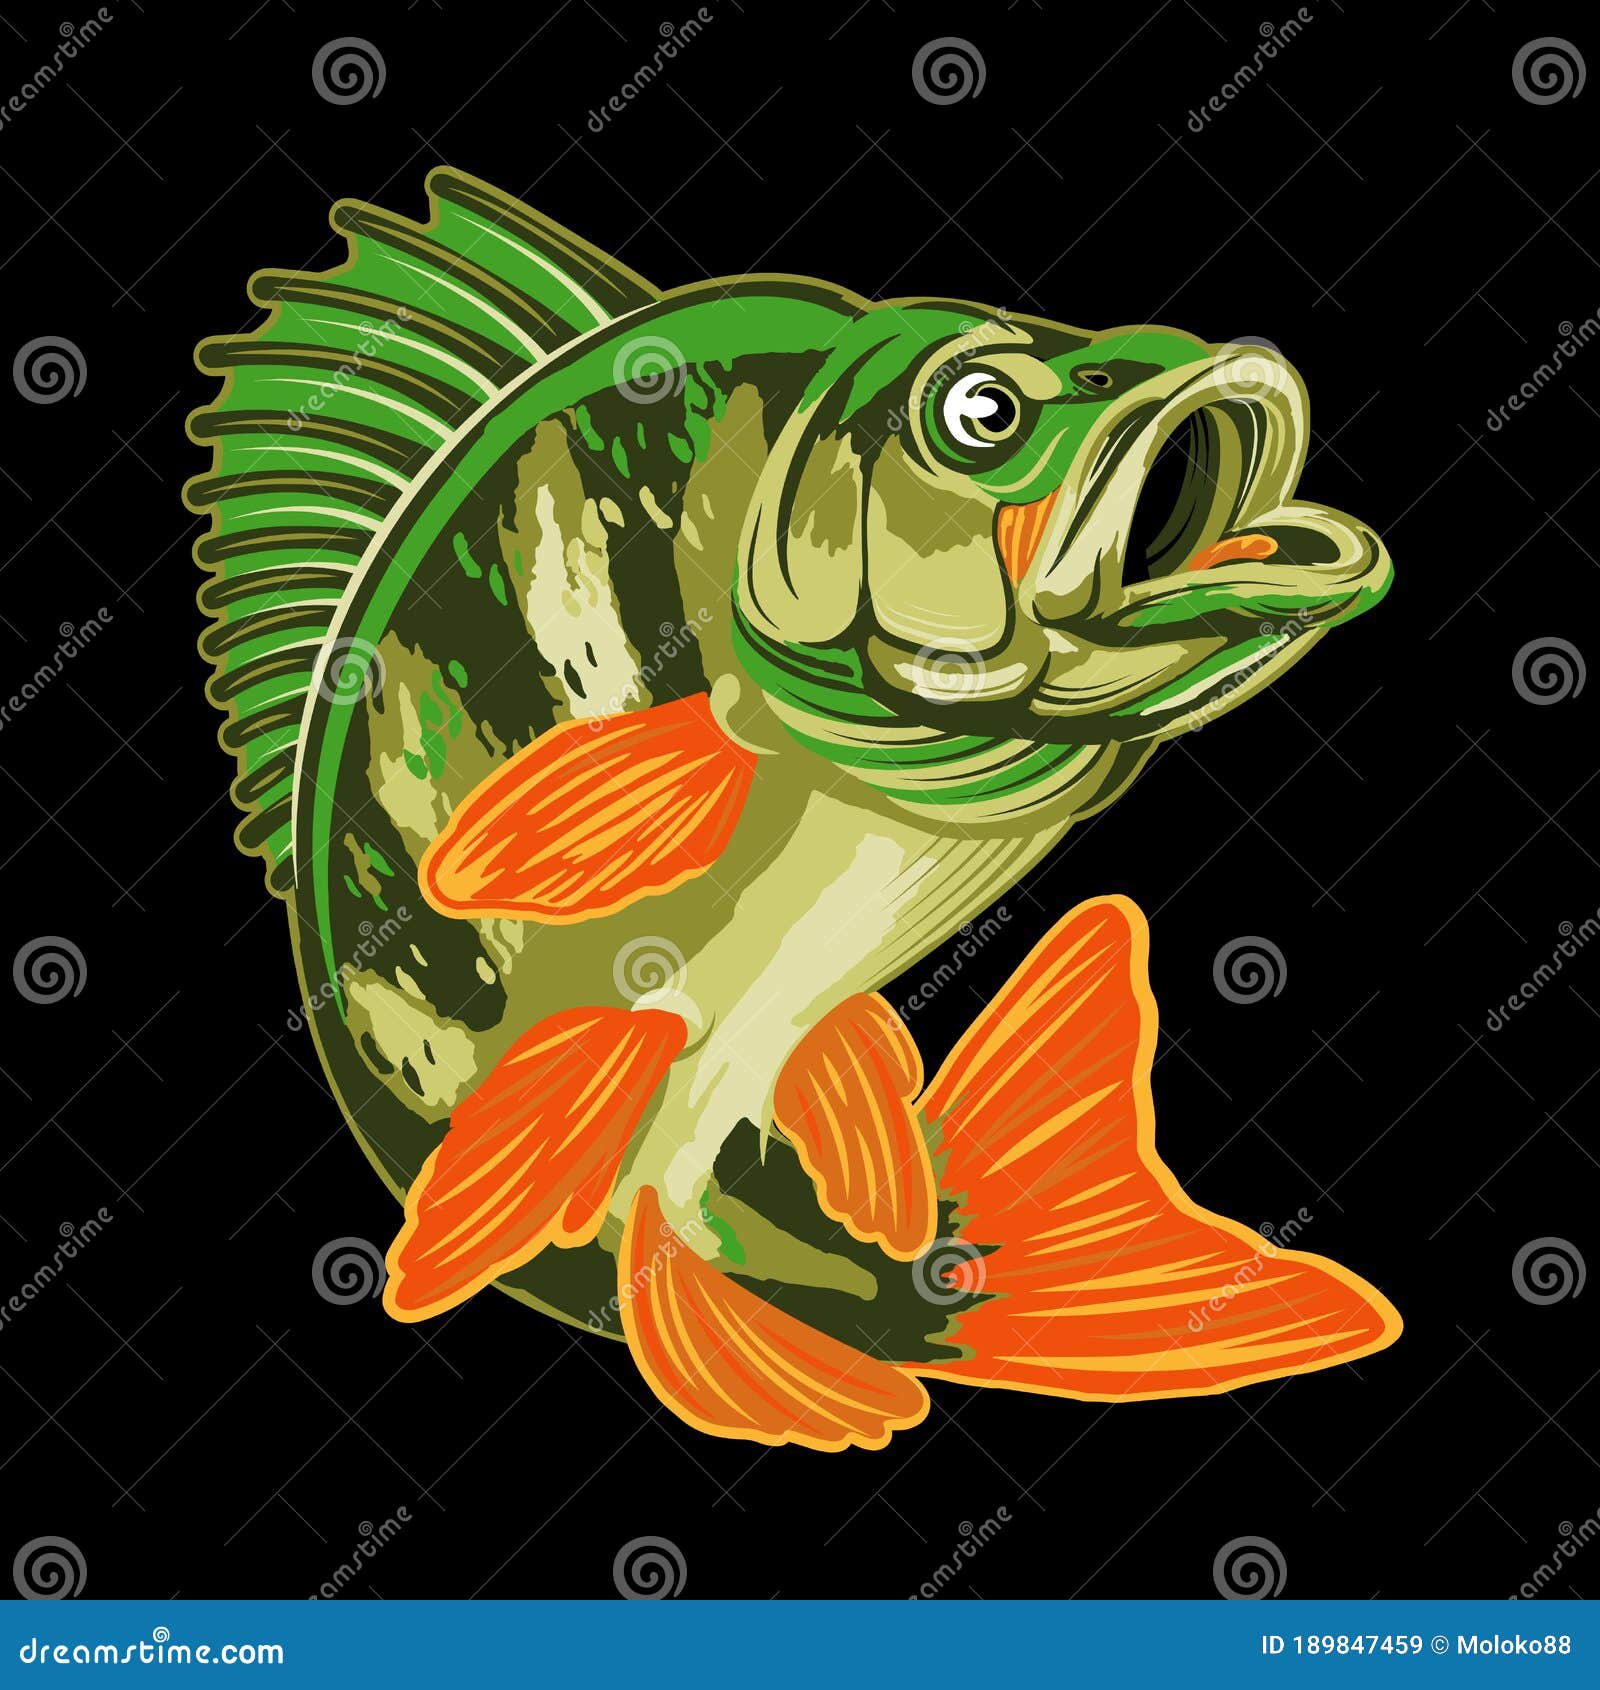 Eurasian River Yellow Perch Fish.Bass Fishing Logo Isolated on Black  Background Stock Vector - Illustration of angler, isolated: 189847459